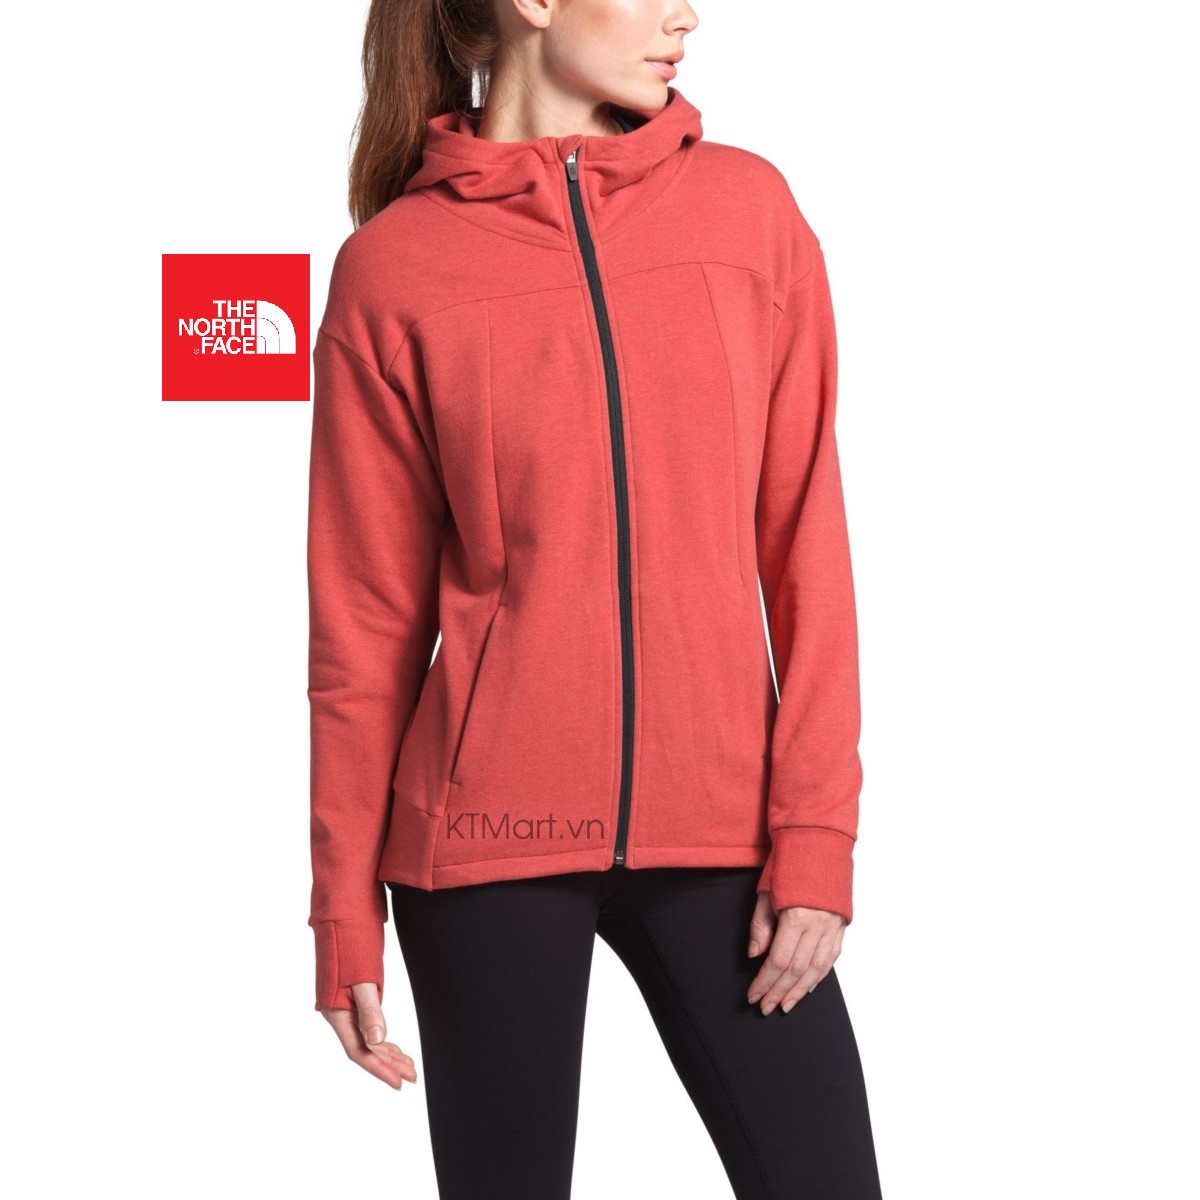 The North Face Women’s Motivation Fleece Full-Zip NF0A3X2L The North Face size S